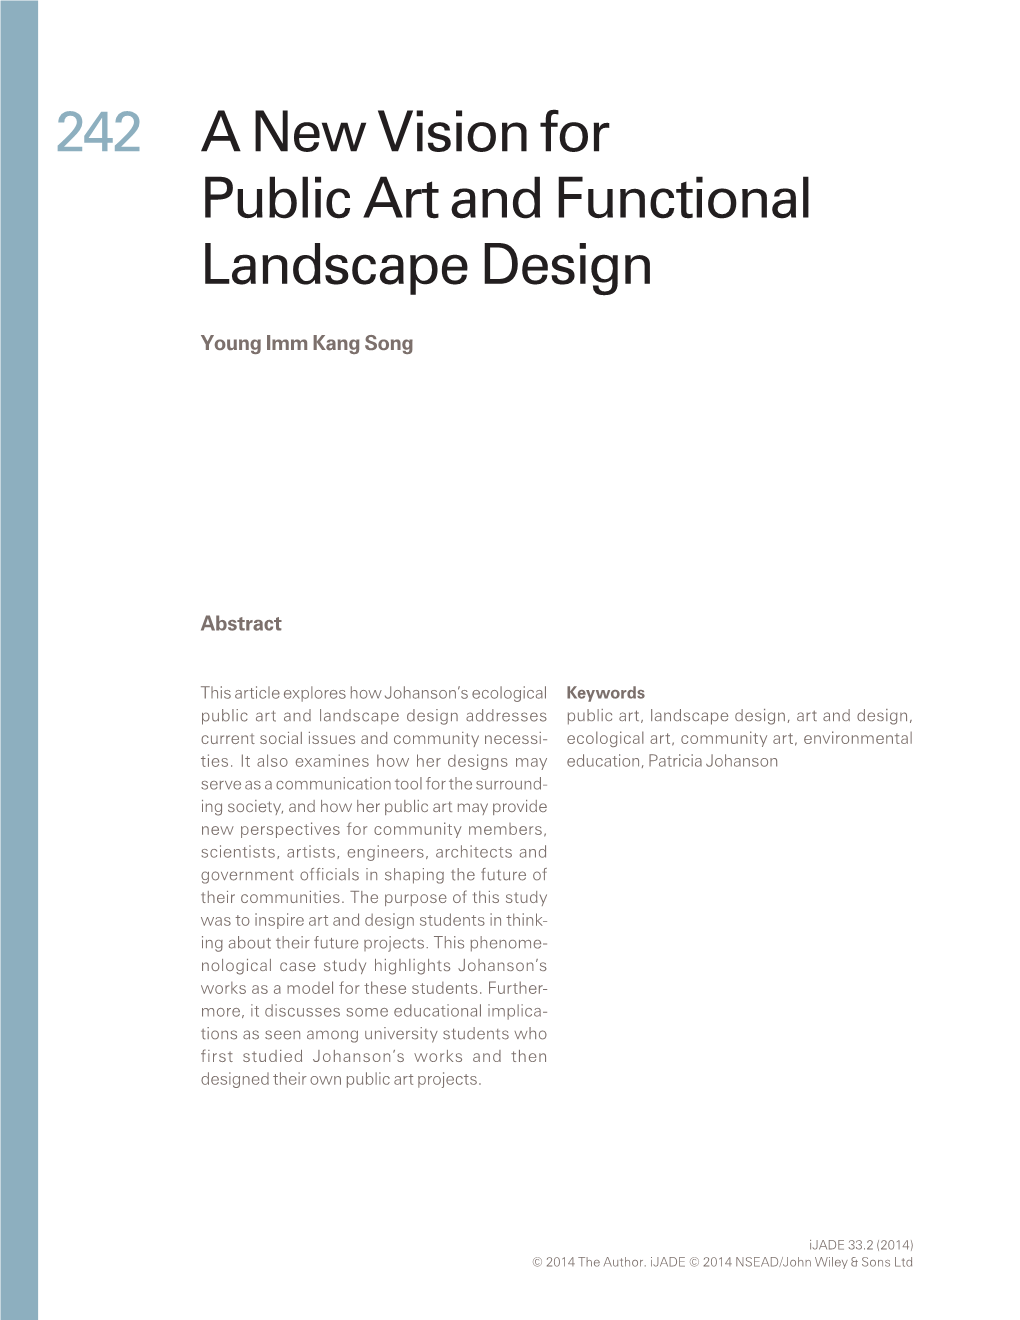 A New Vision for Public Art and Functional Landscape Design